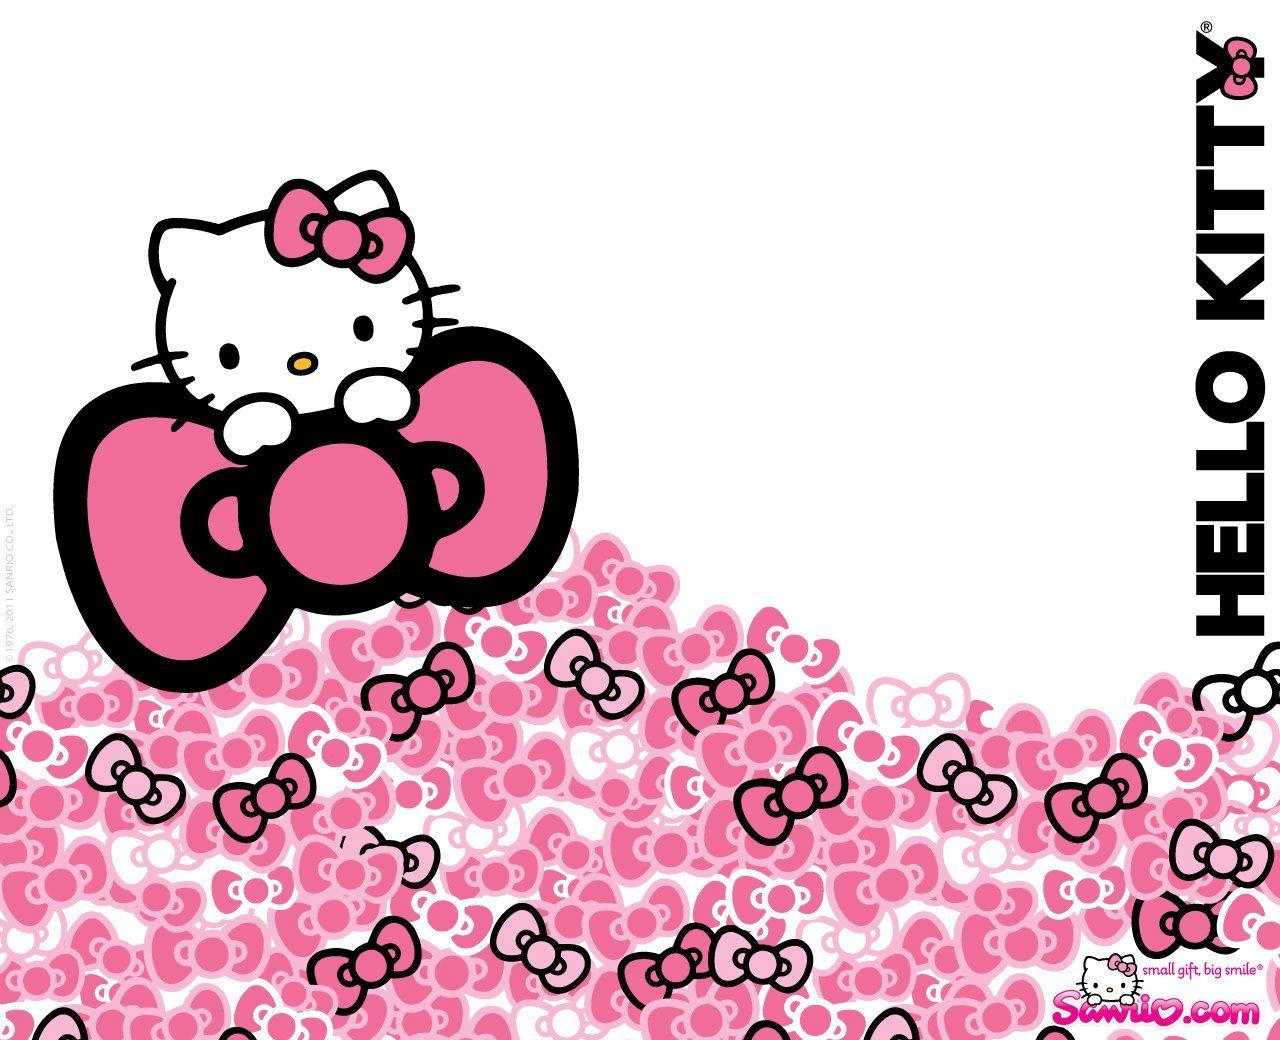 Pin by 333 on Quick Saves Hello kitty iphone wallpaper Pink wallpaper Pink  wallpaper Pink wallpaper backgrounds Hello kitty iphone wallpaper Pink  wallpaper Wallpaper Download  MOONAZ